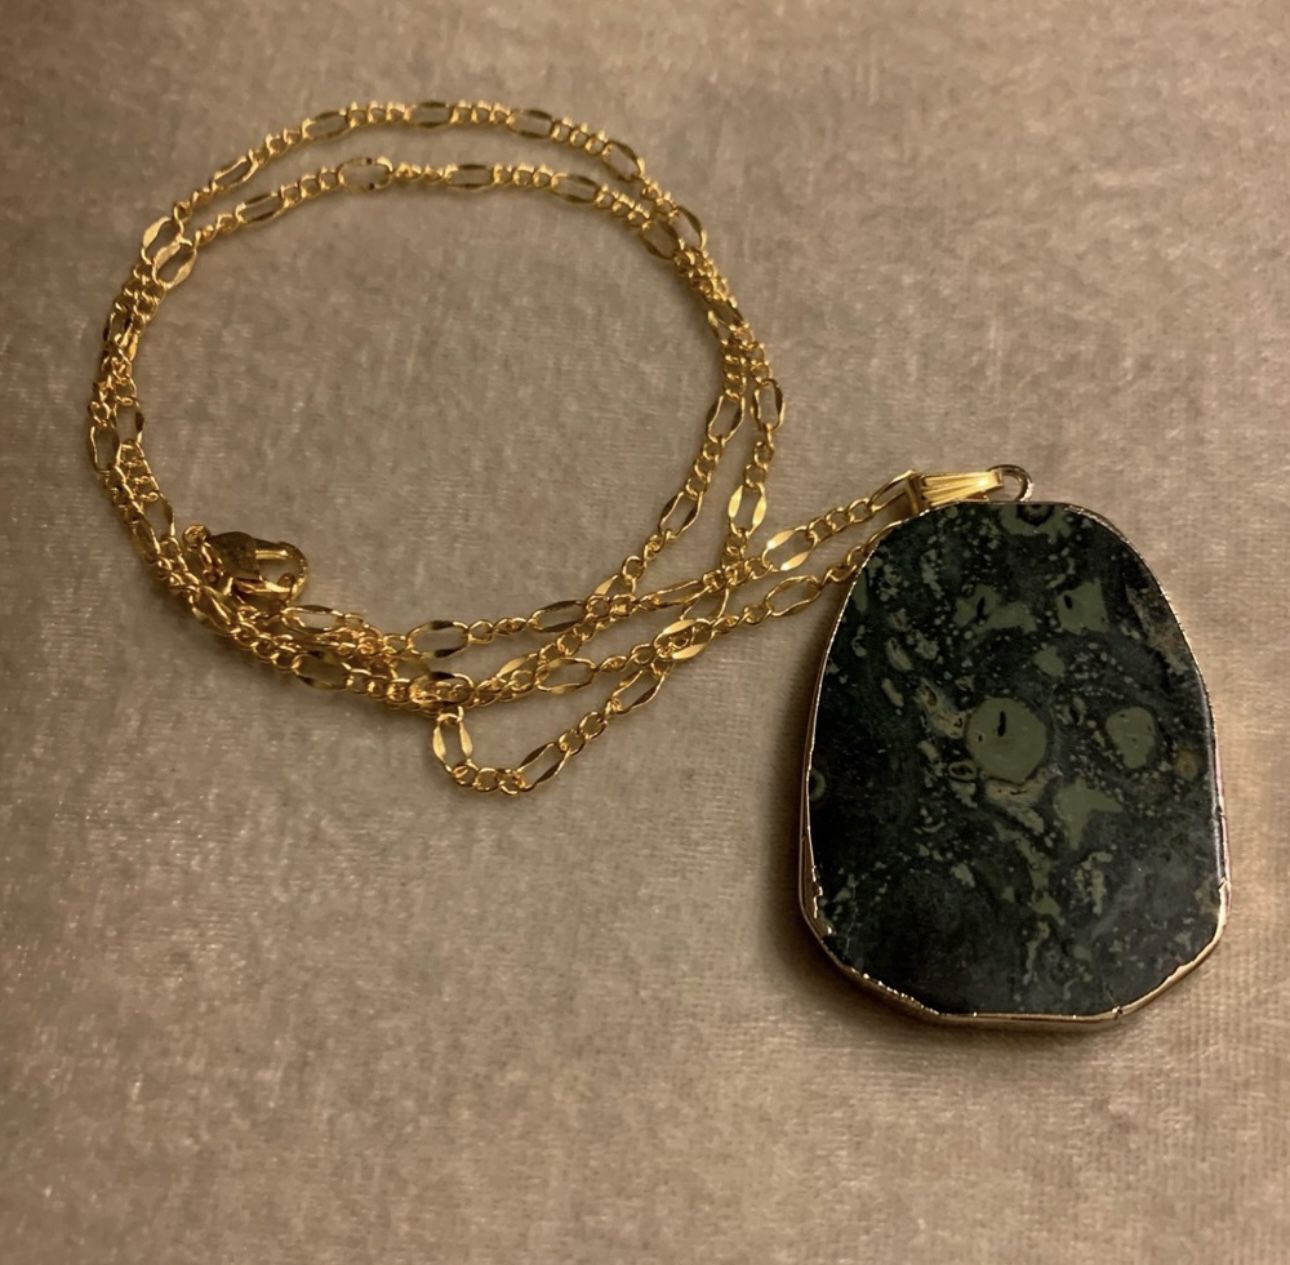 Kambaba  Jasper Pendant With A Brass Gold Plated Chain Necklace